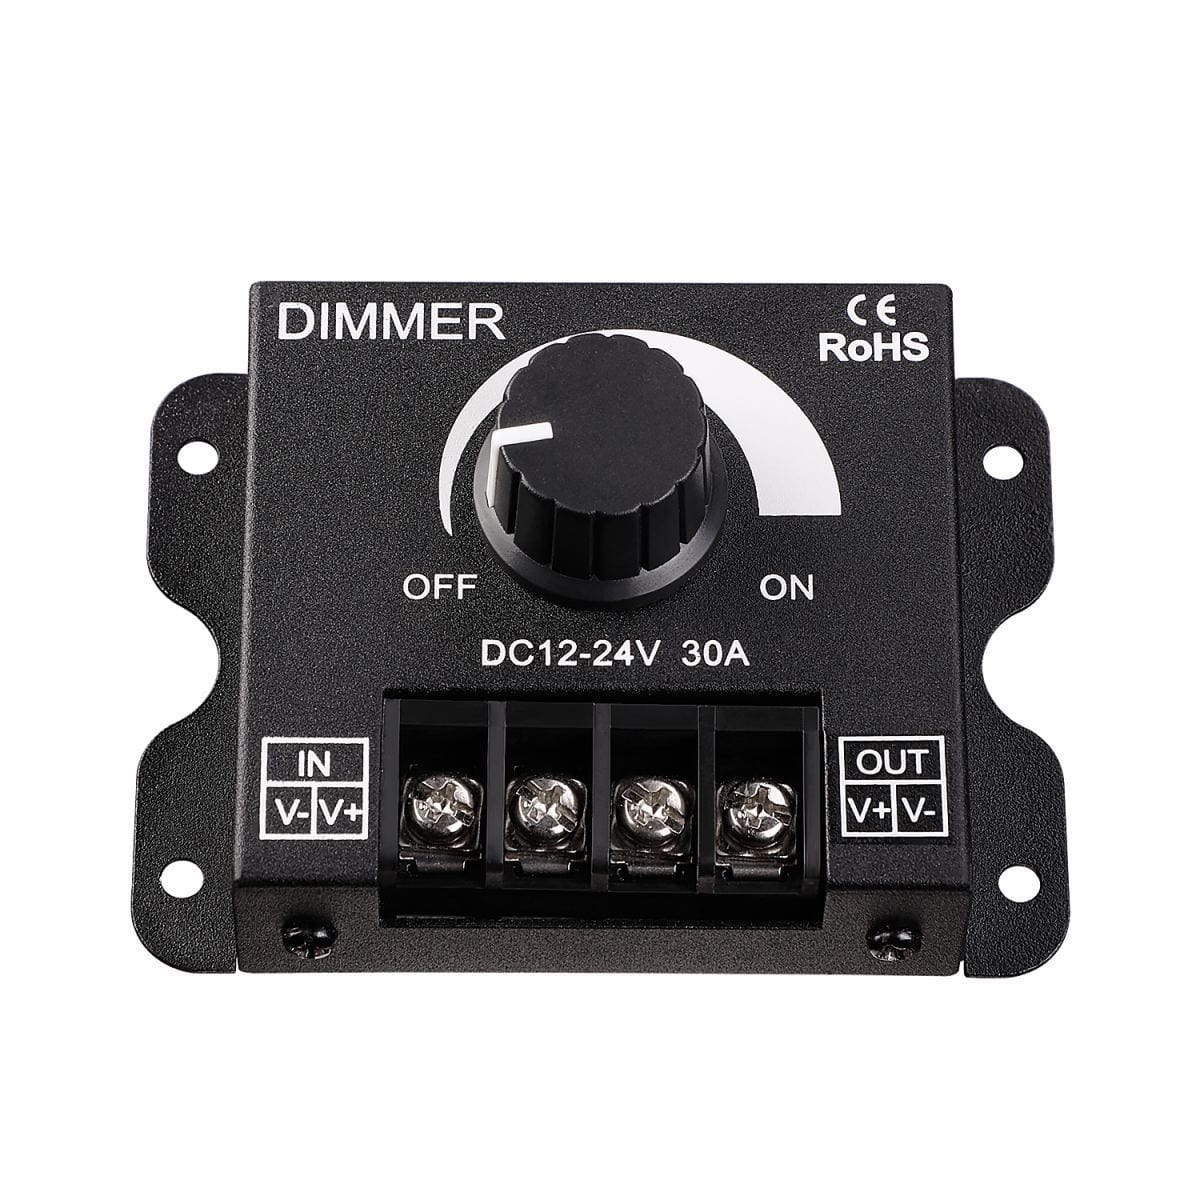 LiquidLEDs Lighting Dimmer PWM Dimming Switch for 12-24 Volt DC LED globes 12-24DIM